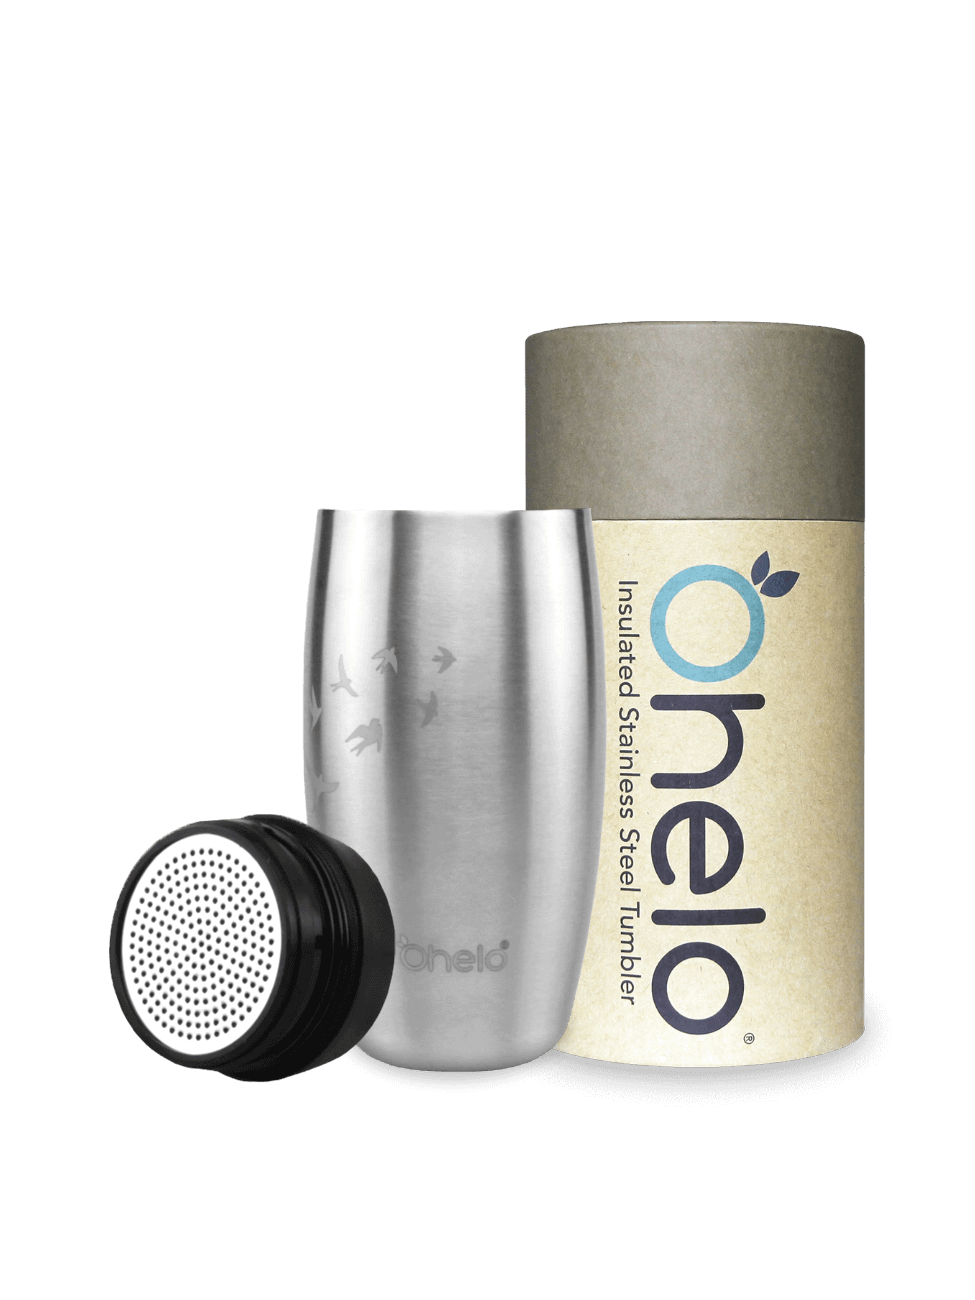 Ohelo BPA free insulated tumbler in stainless steel with bird design with recycled packaging